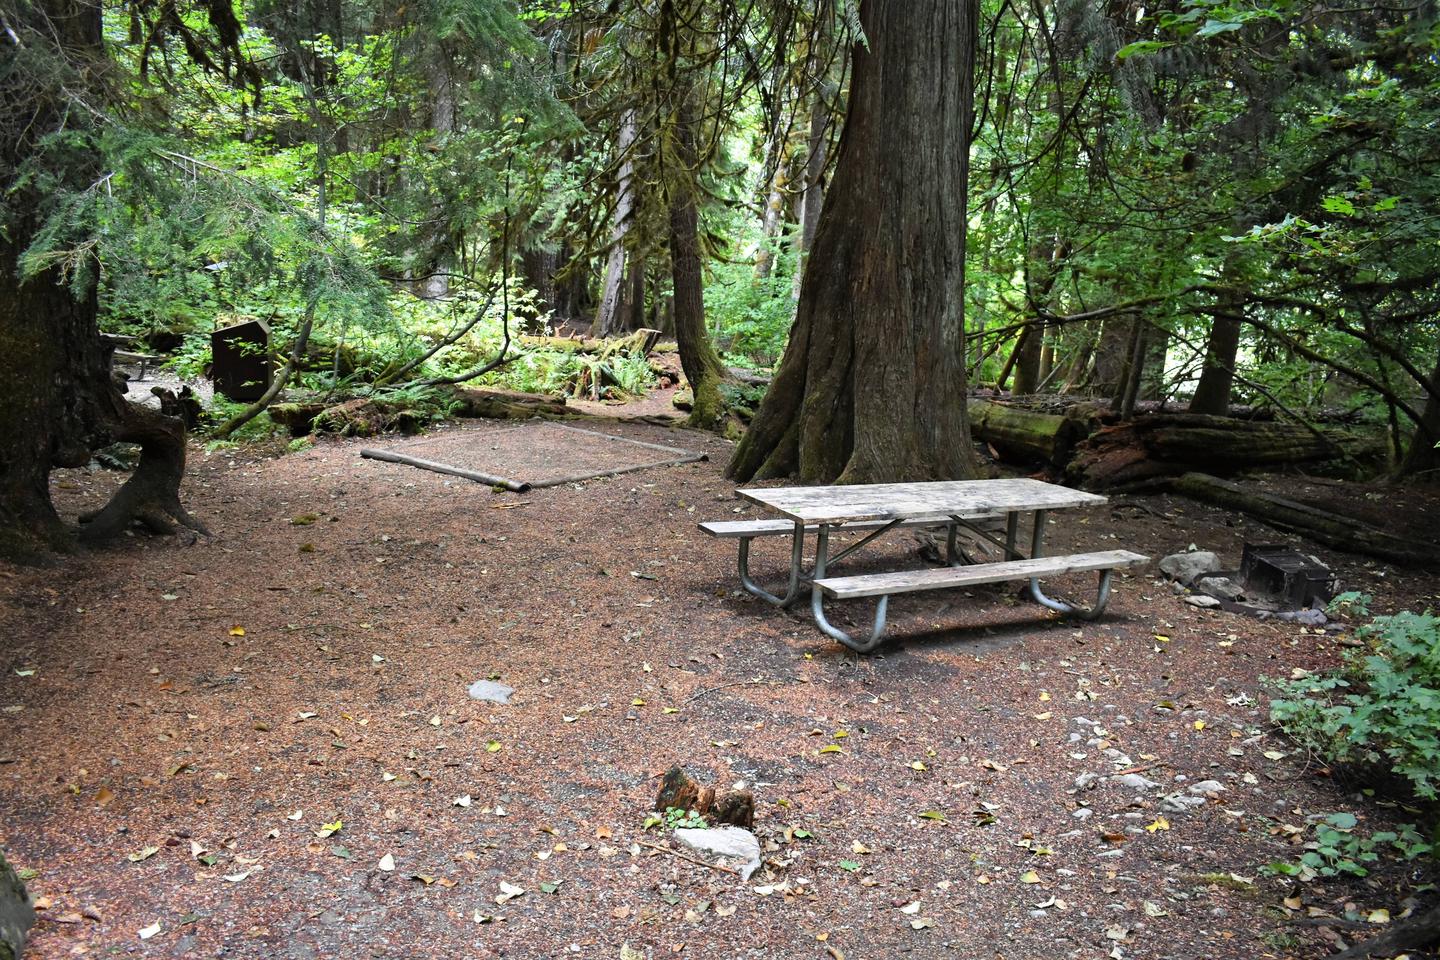 Tent pad, picnic table, and fire ringView of campsite